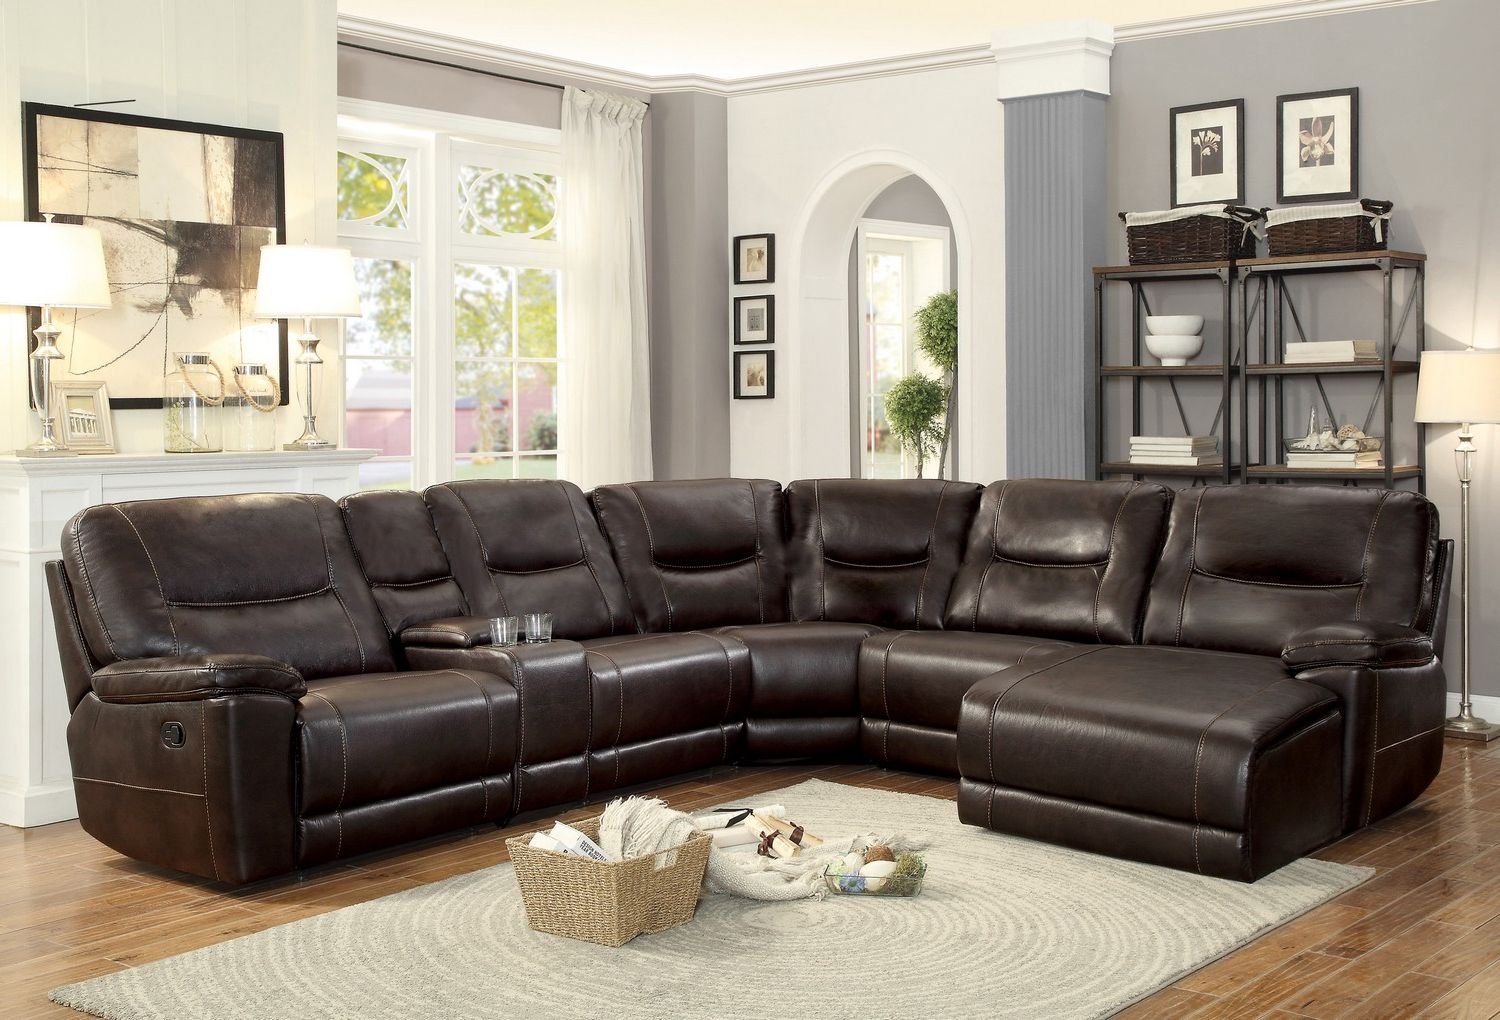 Fashionable Faux Leather Sectional Sofa Sets Inside Homelegance Columbus Reclining Sectional Sofa Set B – Breathable Faux (View 7 of 15)